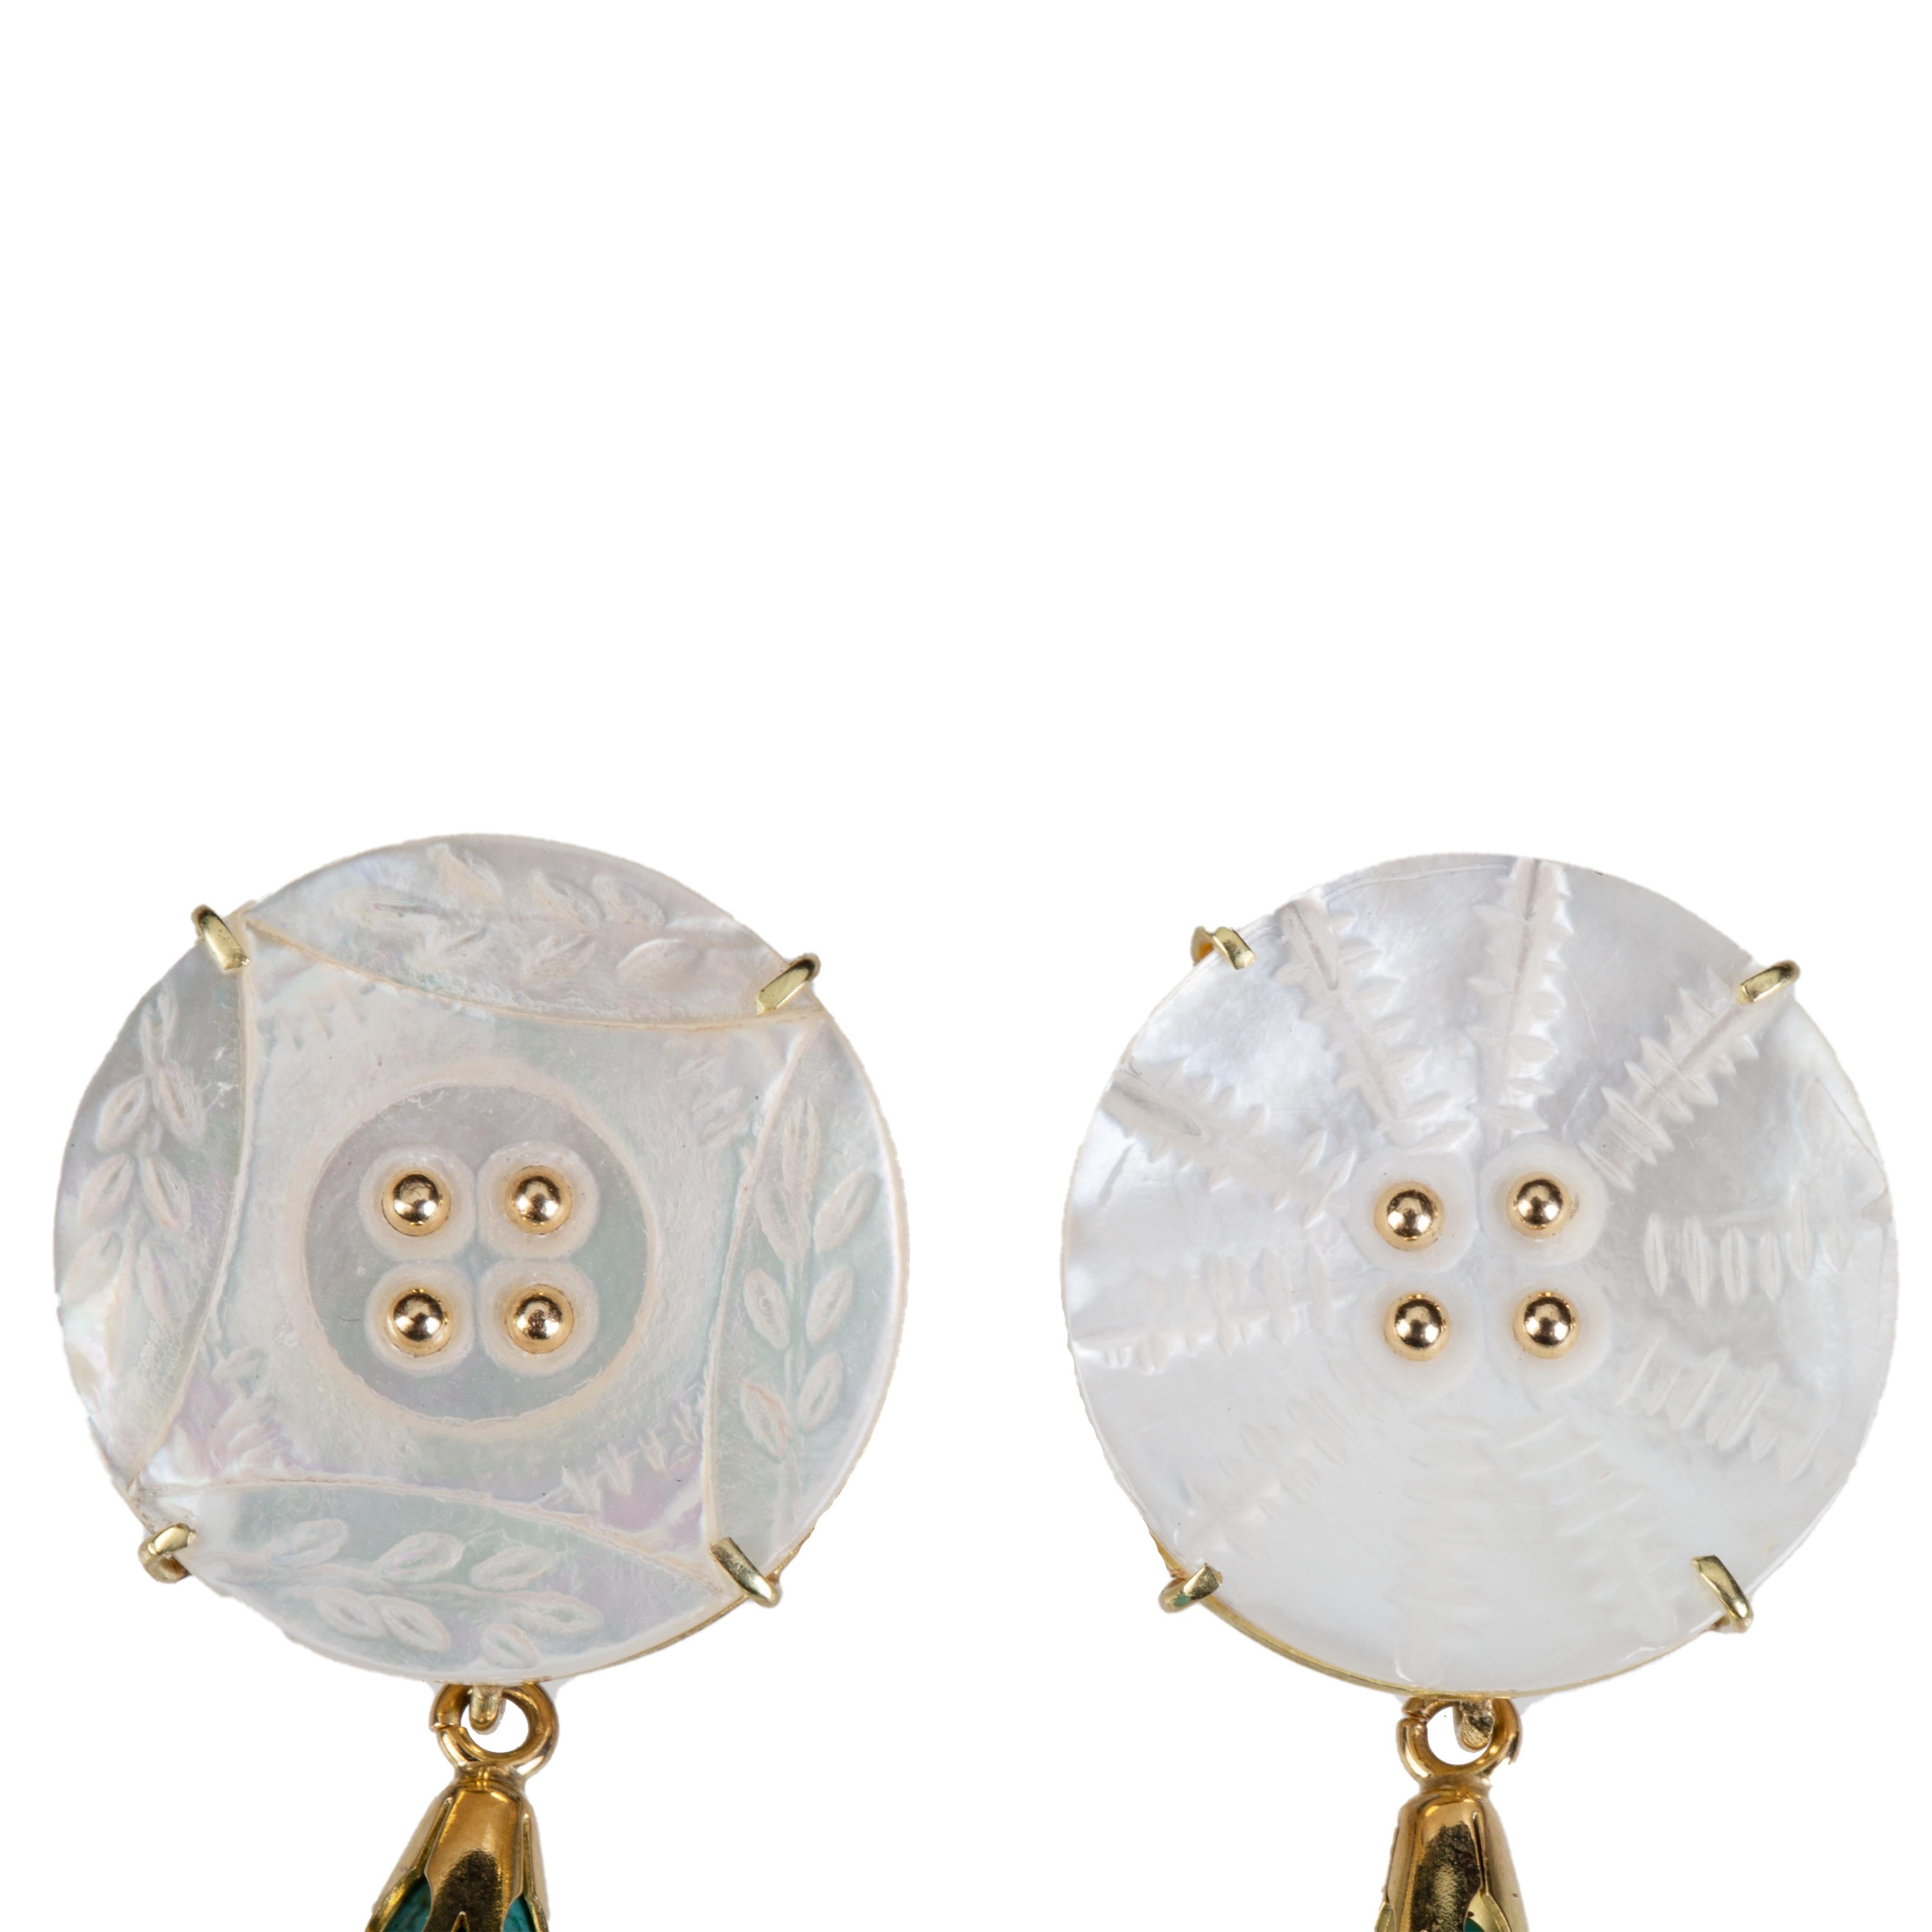 Antique 1940 mother of pearl button, turquoise drop 18k gold gr.8,40. Total  length 4 cm.
All Giulia Colussi jewelry is new and has never been previously owned or worn. Each item will arrive at your door beautifully gift wrapped in our boxes, put